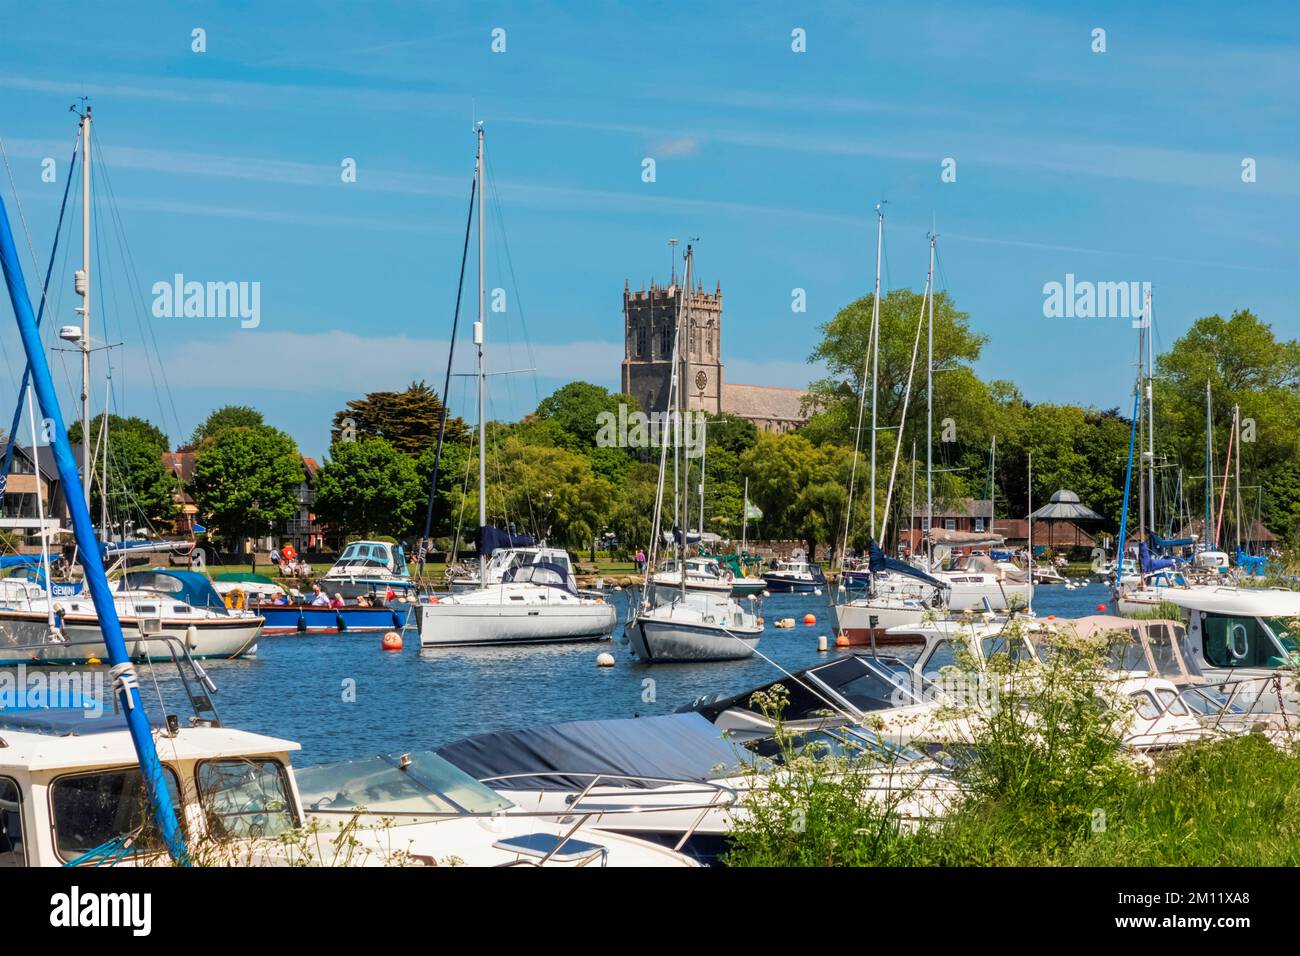 England, Dorset, Christchurch, Yachts on The River Stour and Christchurch Priory Stock Photo